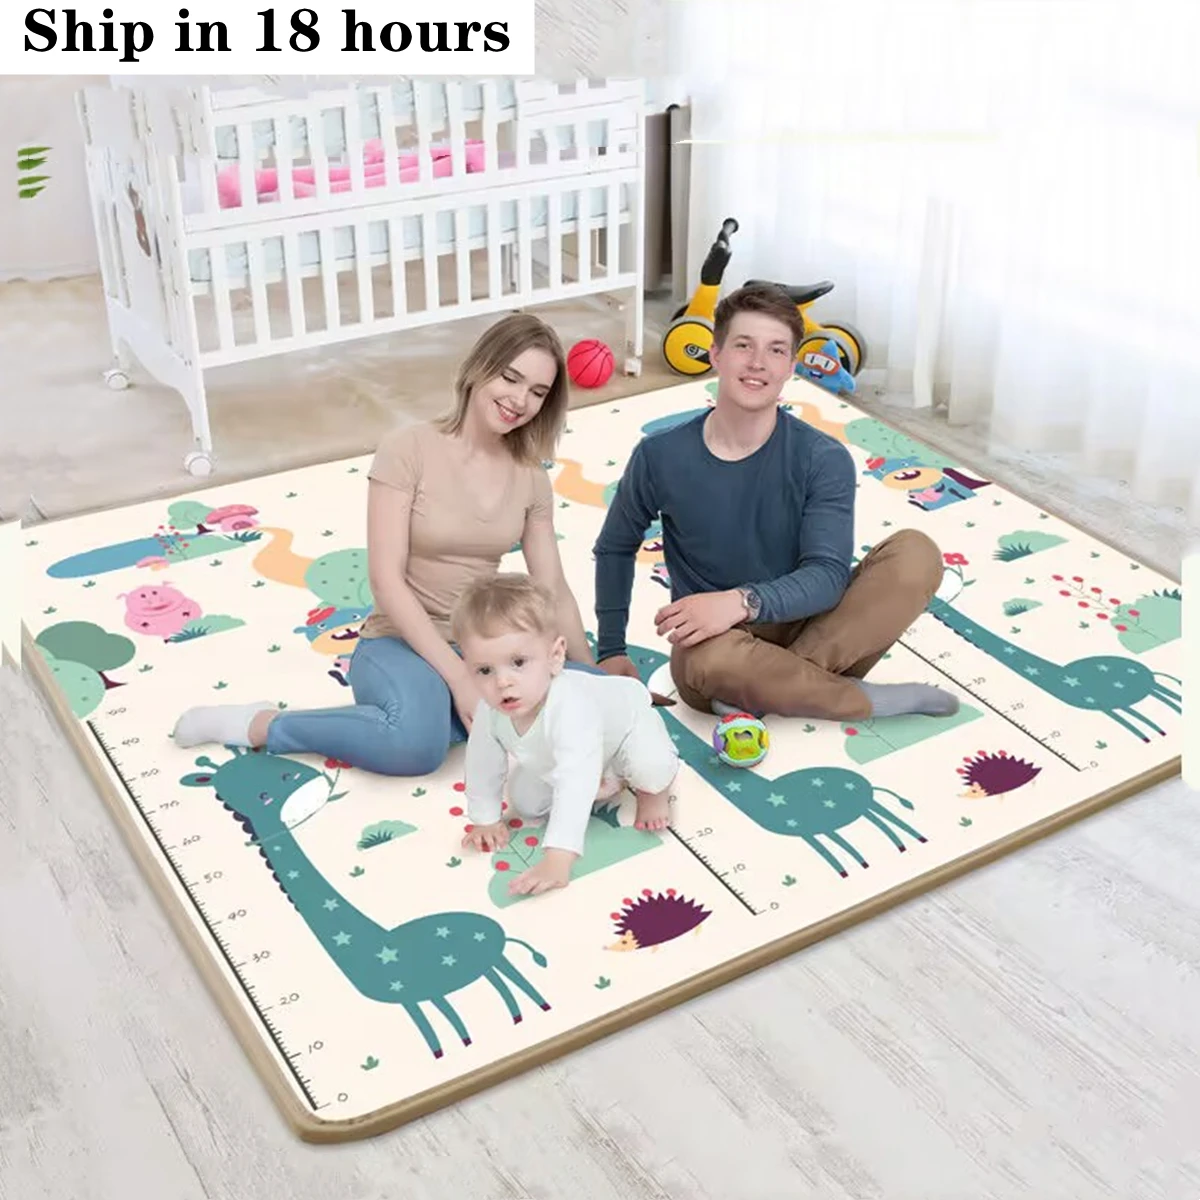 Large Size Baby Activities Crawling Play Mats Non-toxic Thick EPE Baby Activity Gym Room Mat Game Mat for Children's Safety Rugs 100x180cm black mickey mouse baby play mat carpet large size non slip wear resisting washable living room decoration rugs